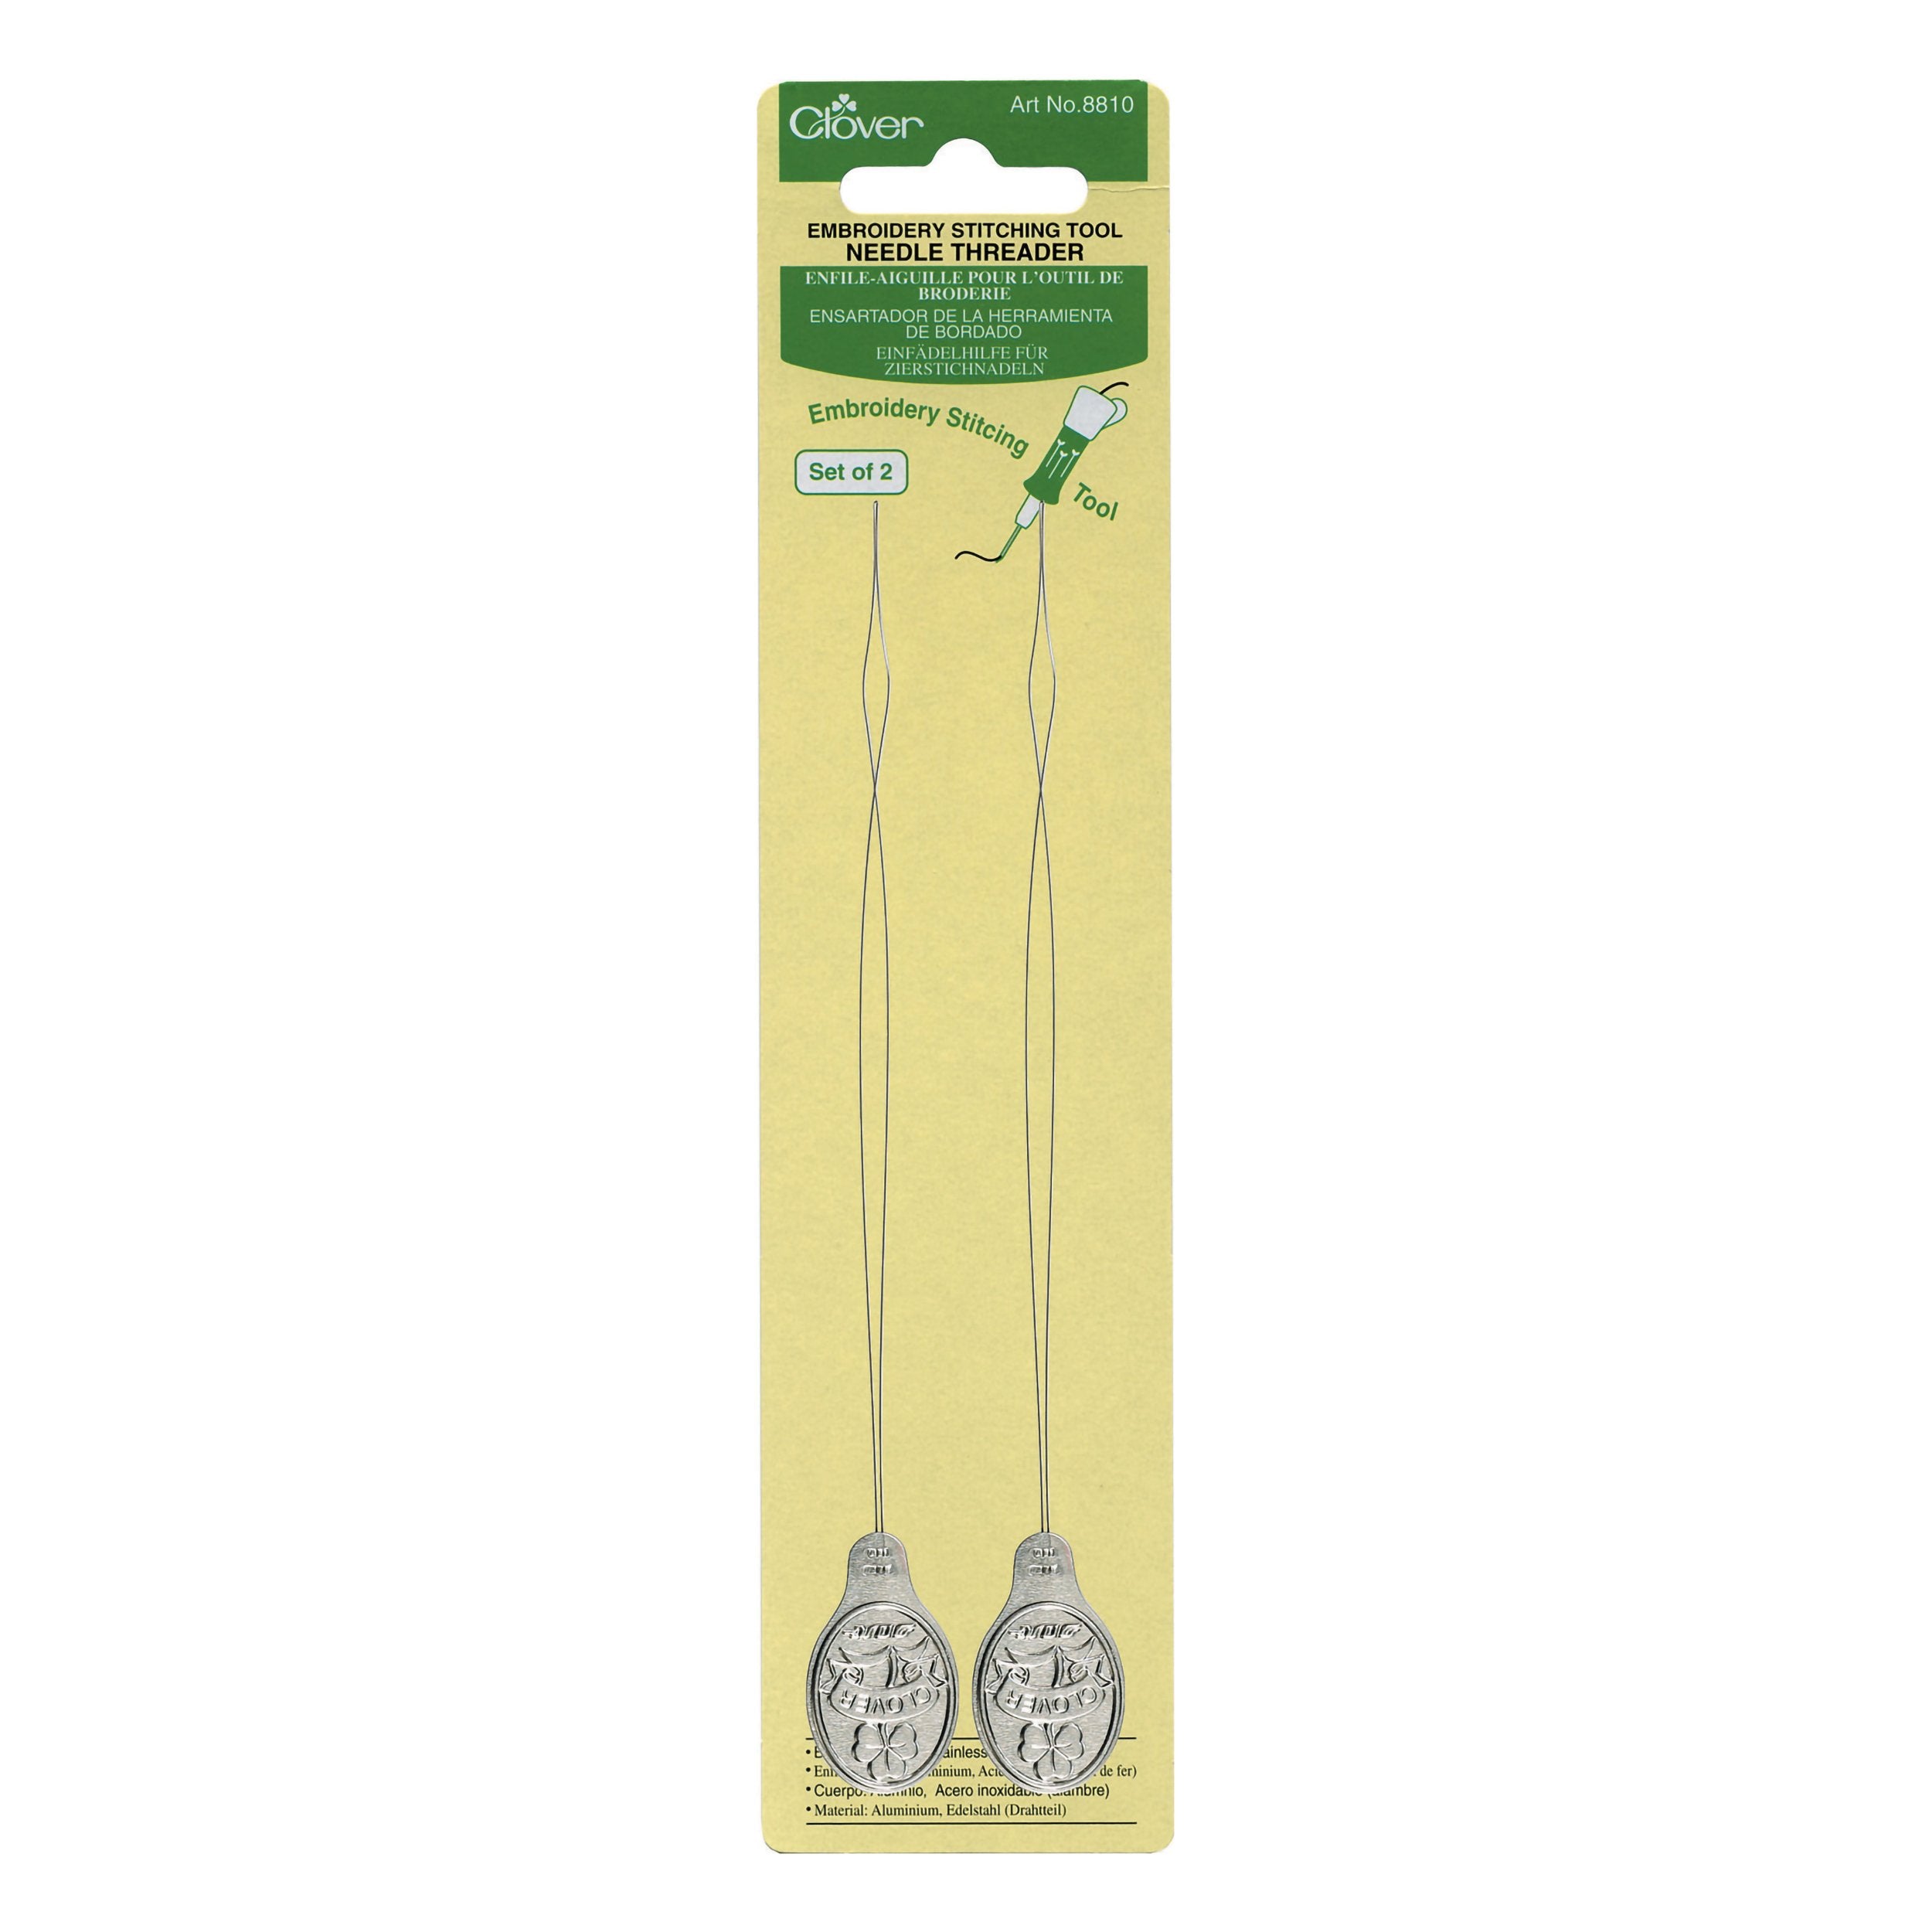 Clover Embroidery Stitching Tool Needle Threaders 2/Pkg